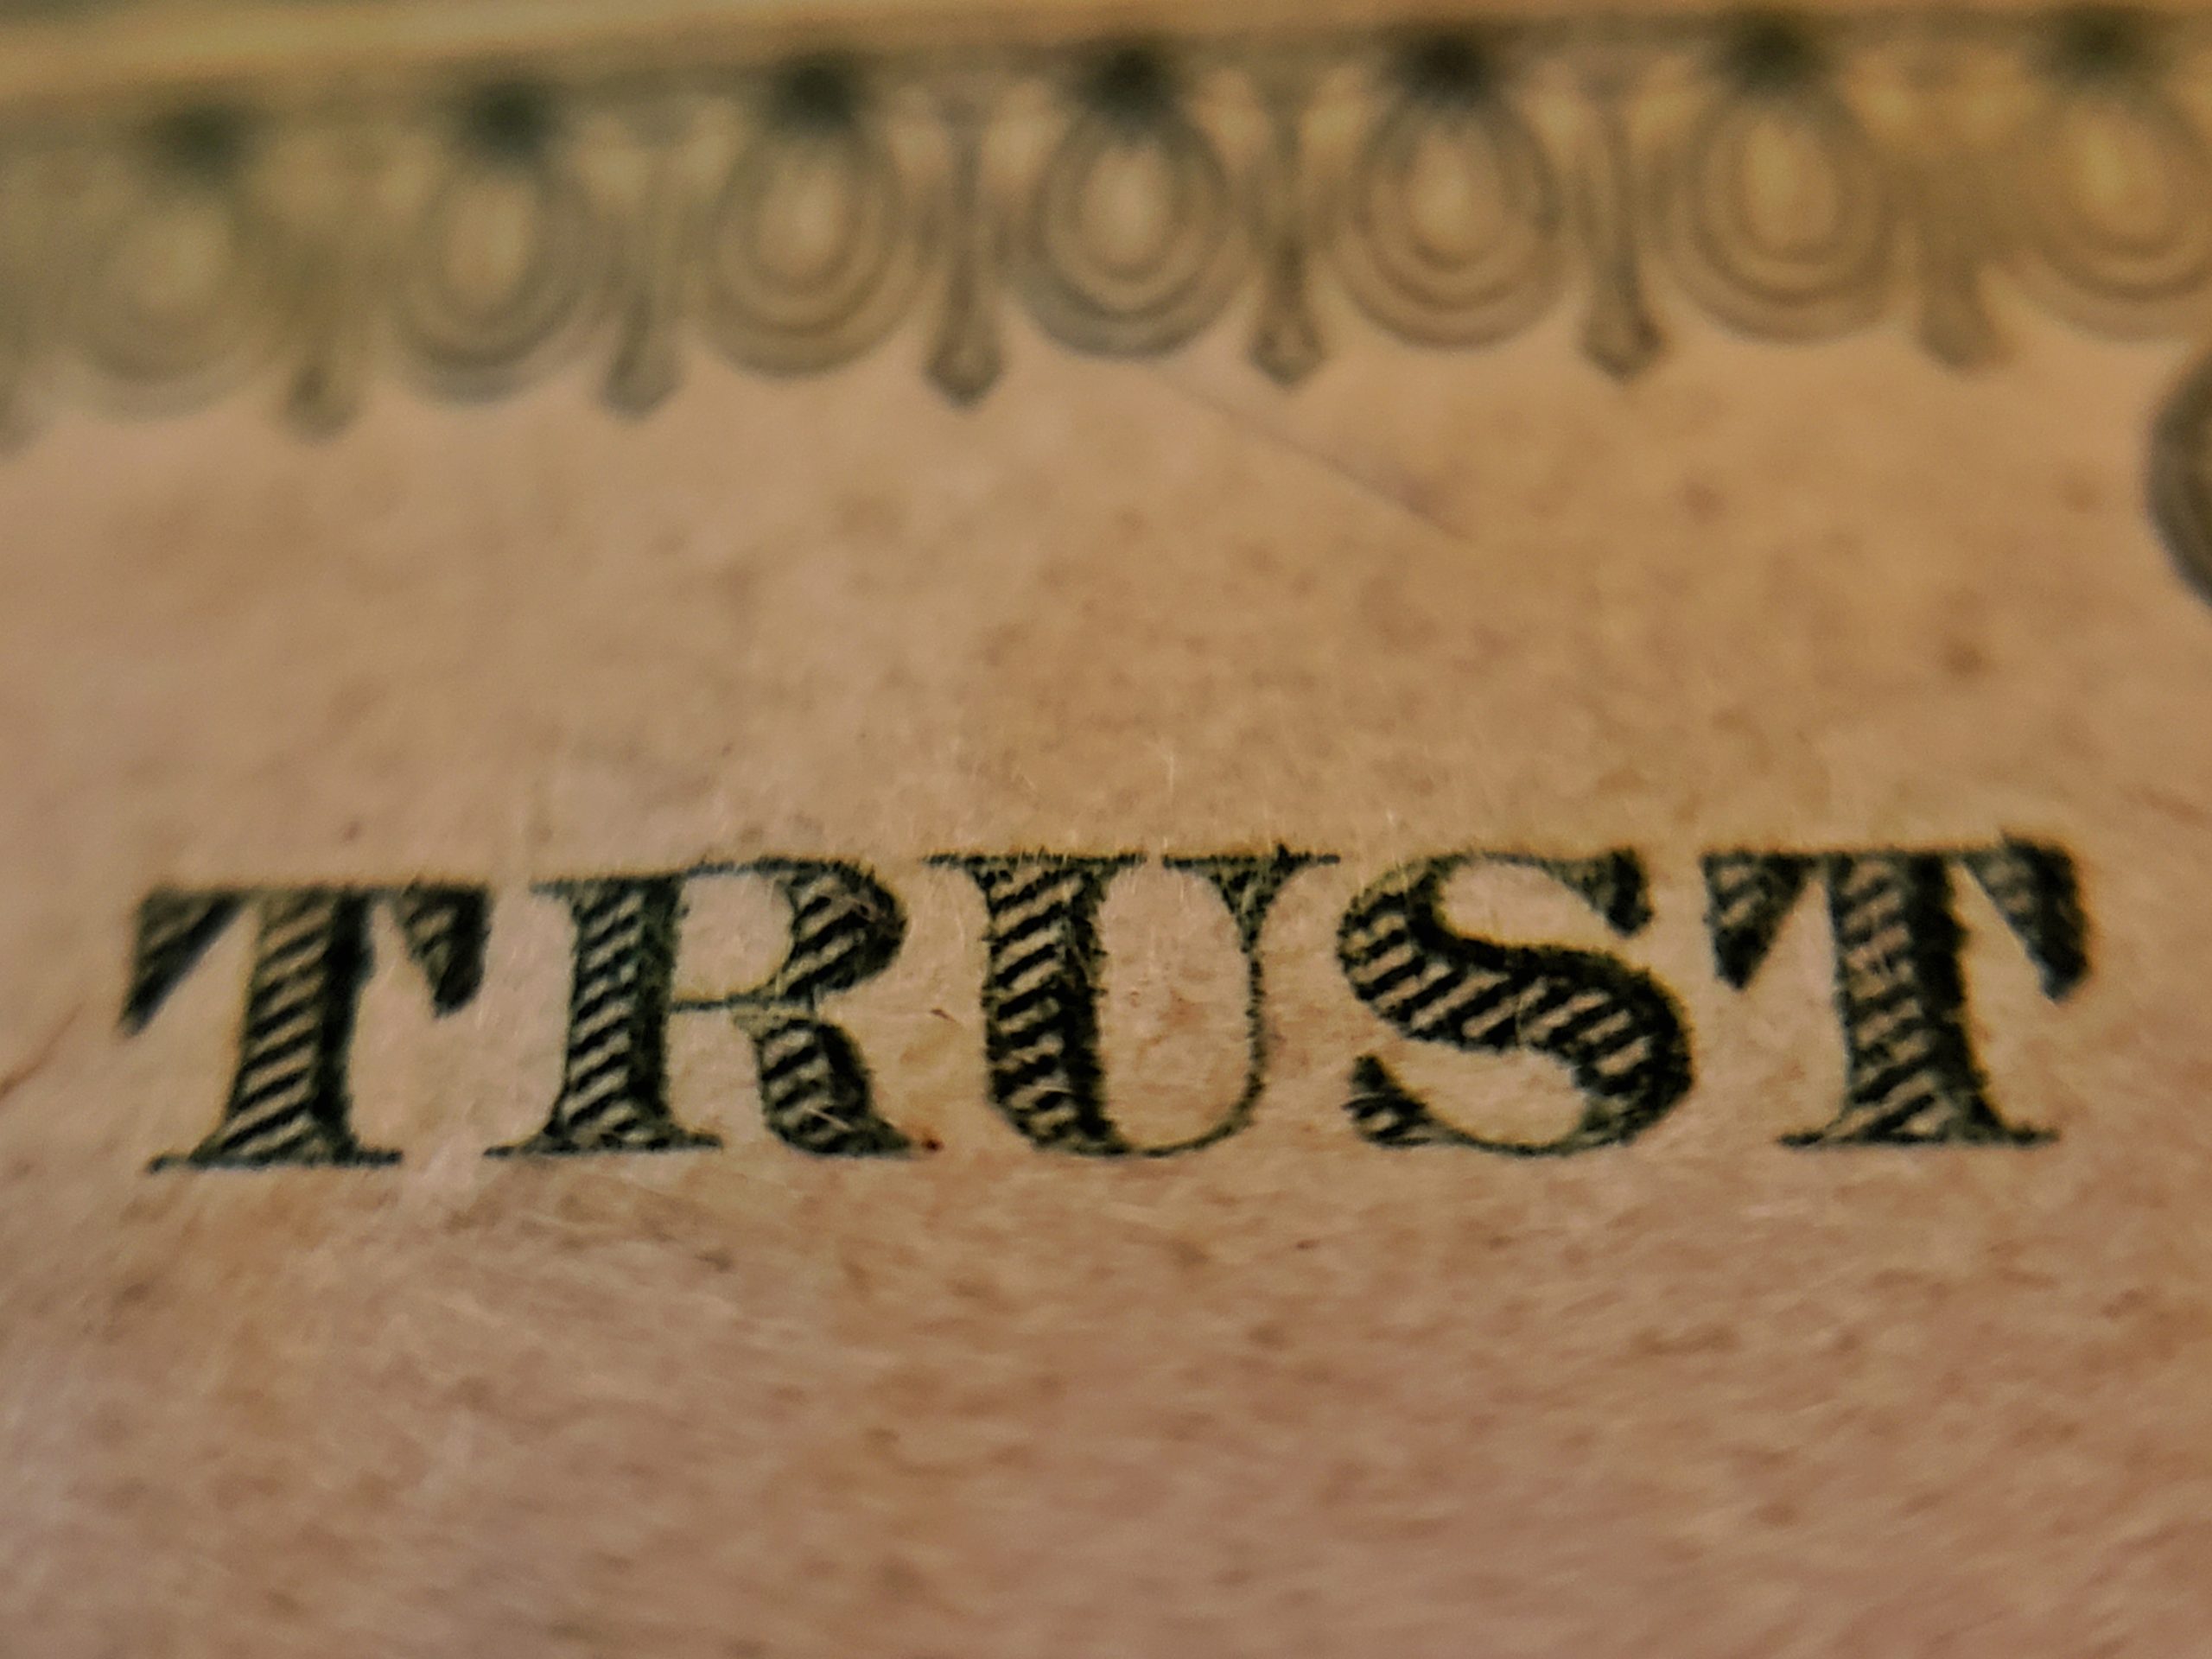 Human Resources and Trust